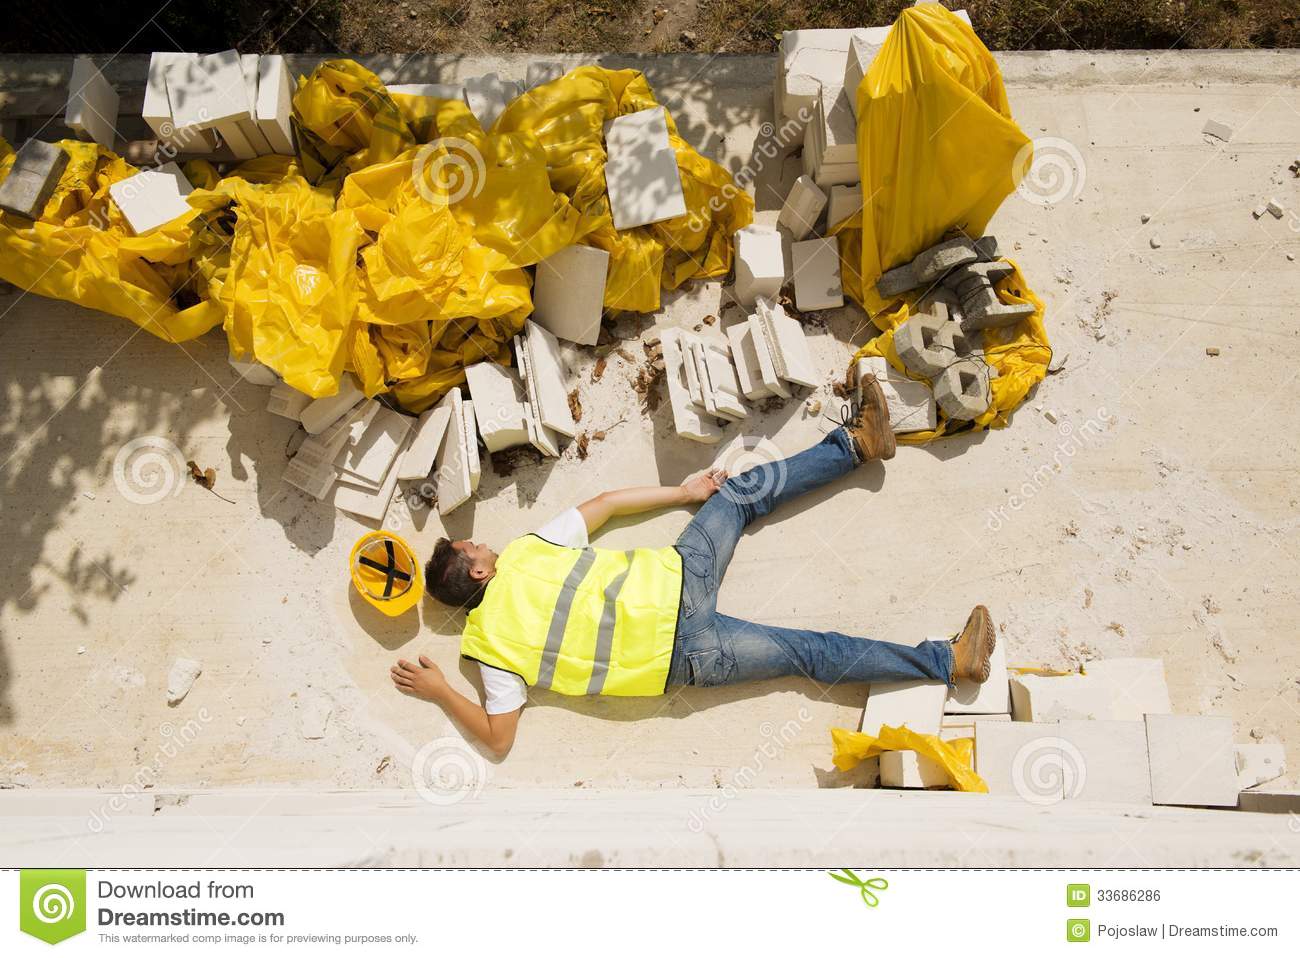 Construction Accident Royalty Free Stock Image   Image  33686286